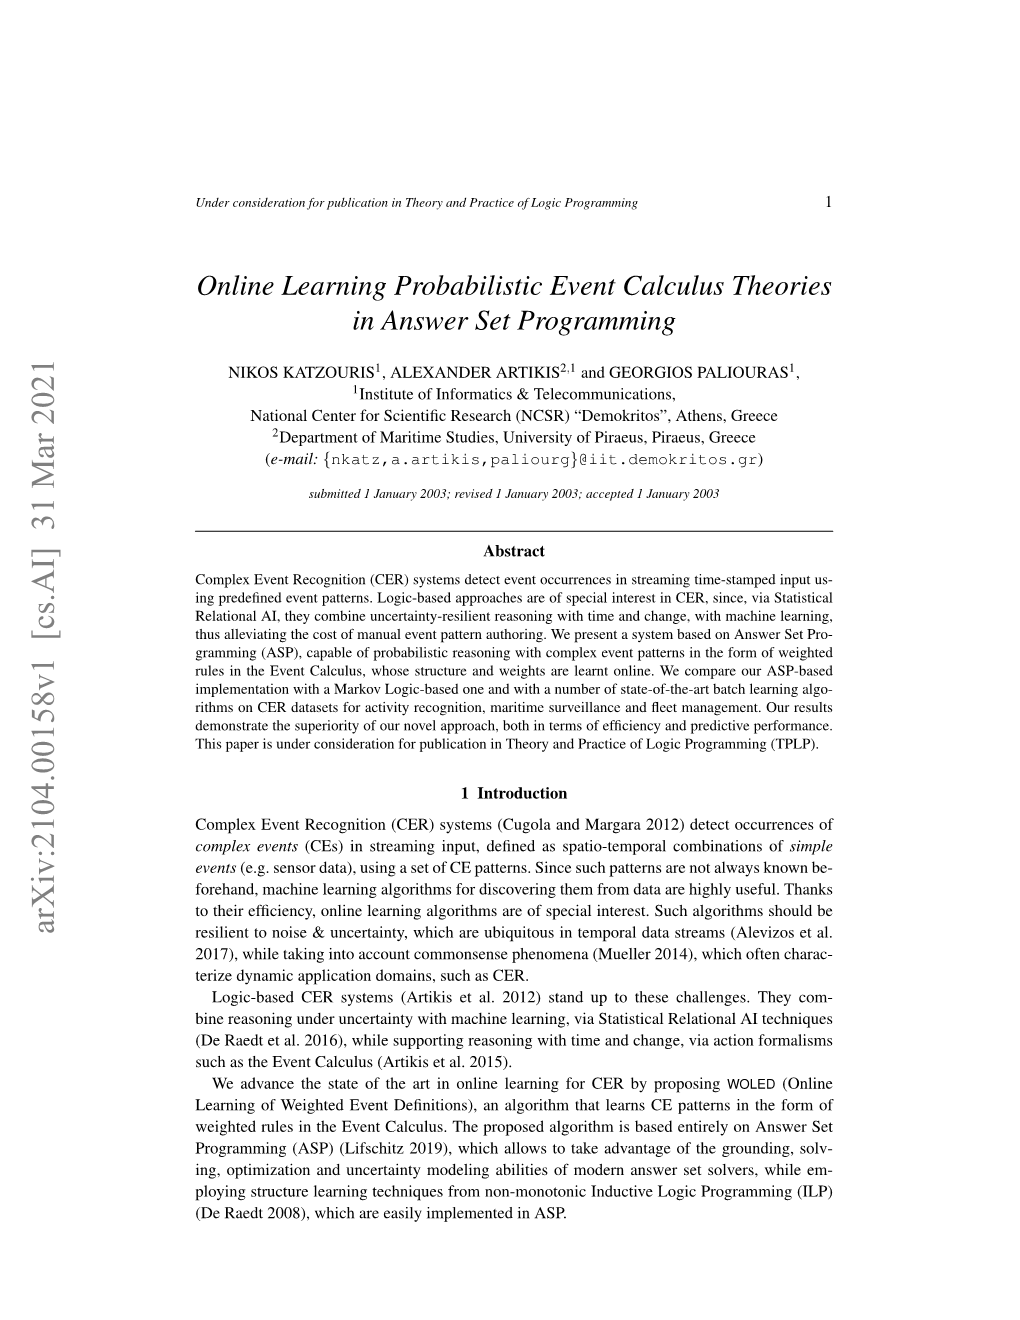 Online Learning Probabilistic Event Calculus Theories in Answer Set Programming